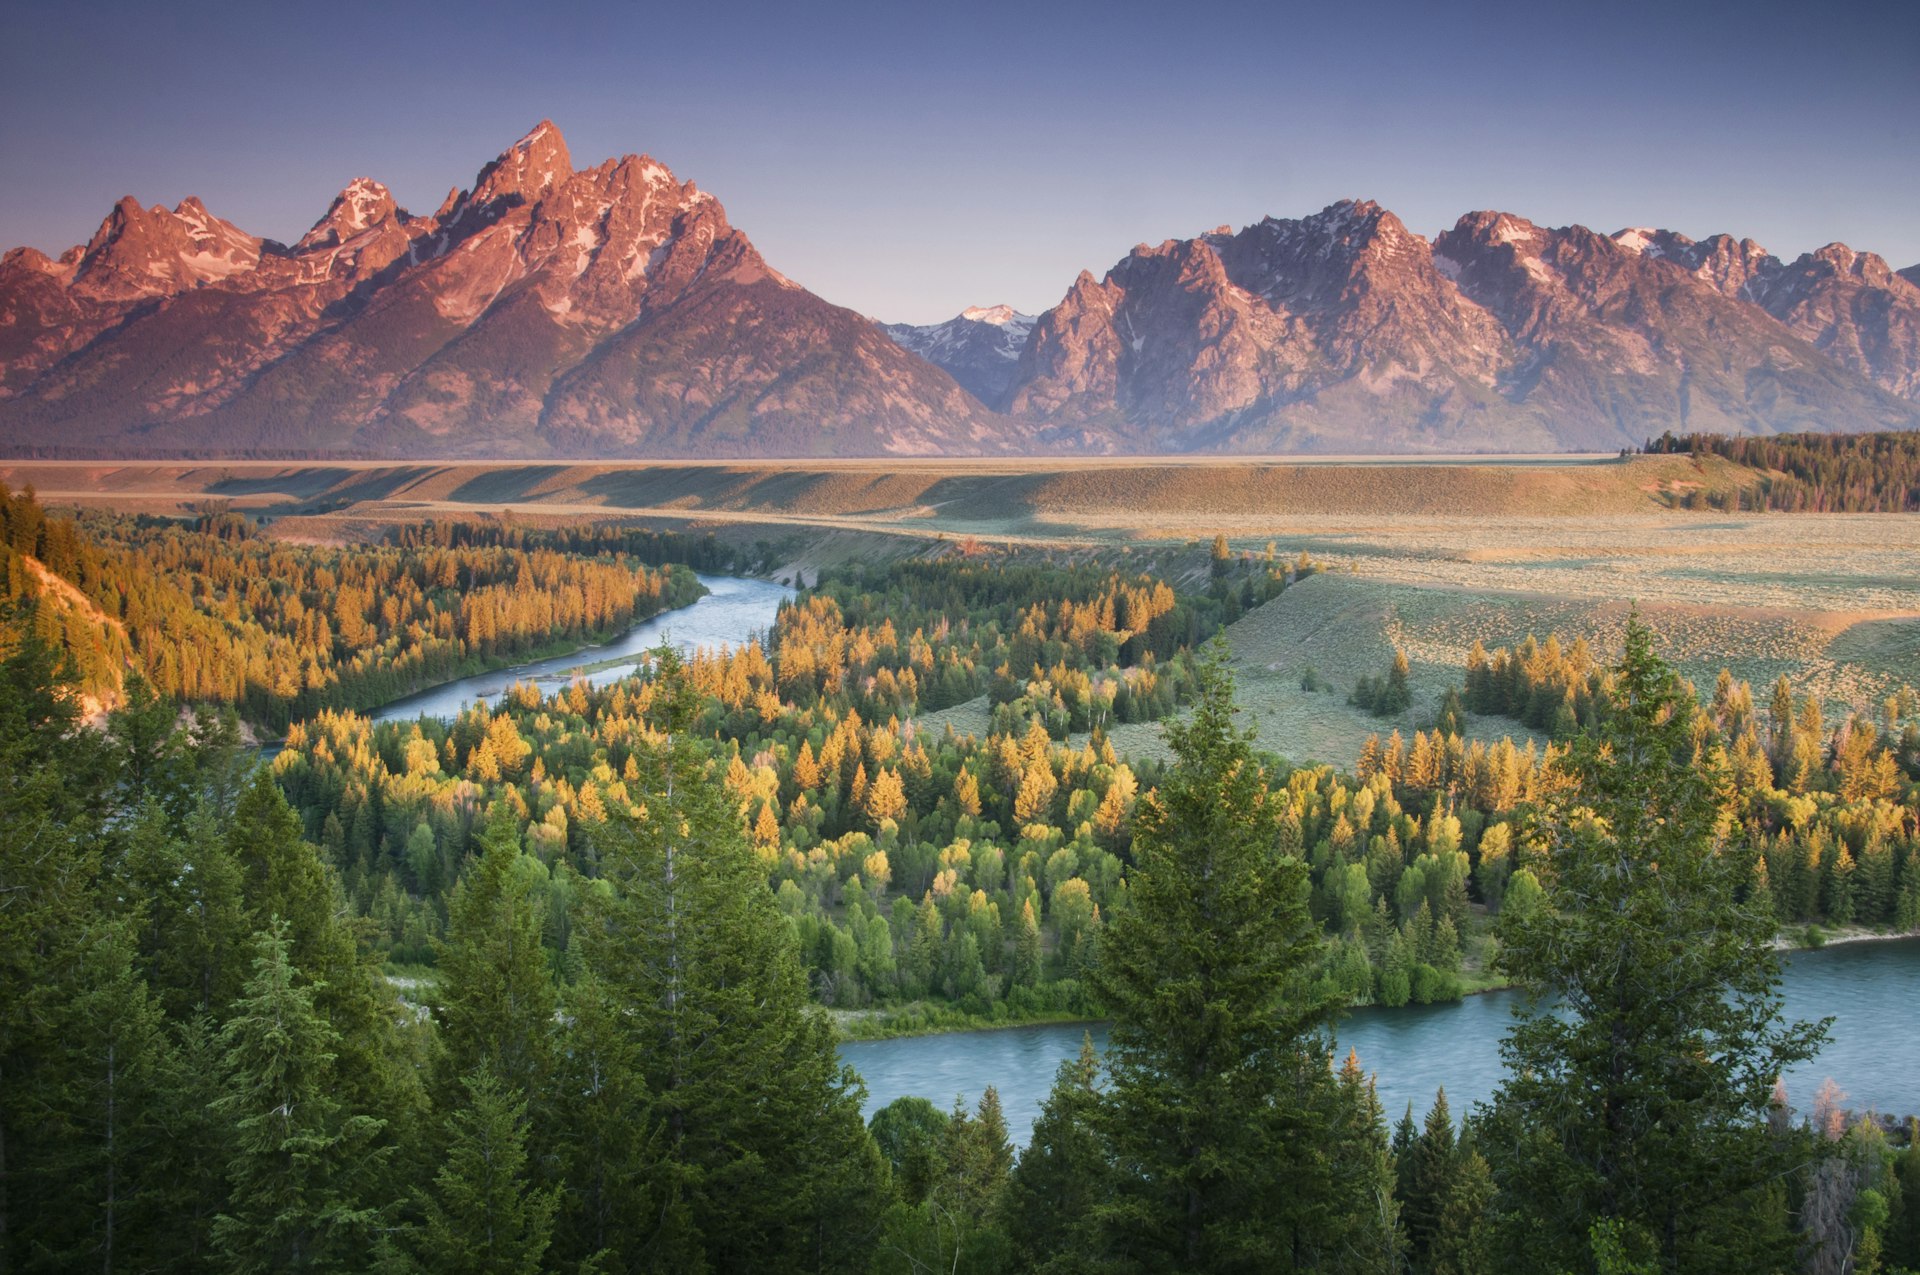 500px Photo ID: 59908268 - Grand tetons from Snake river overlook